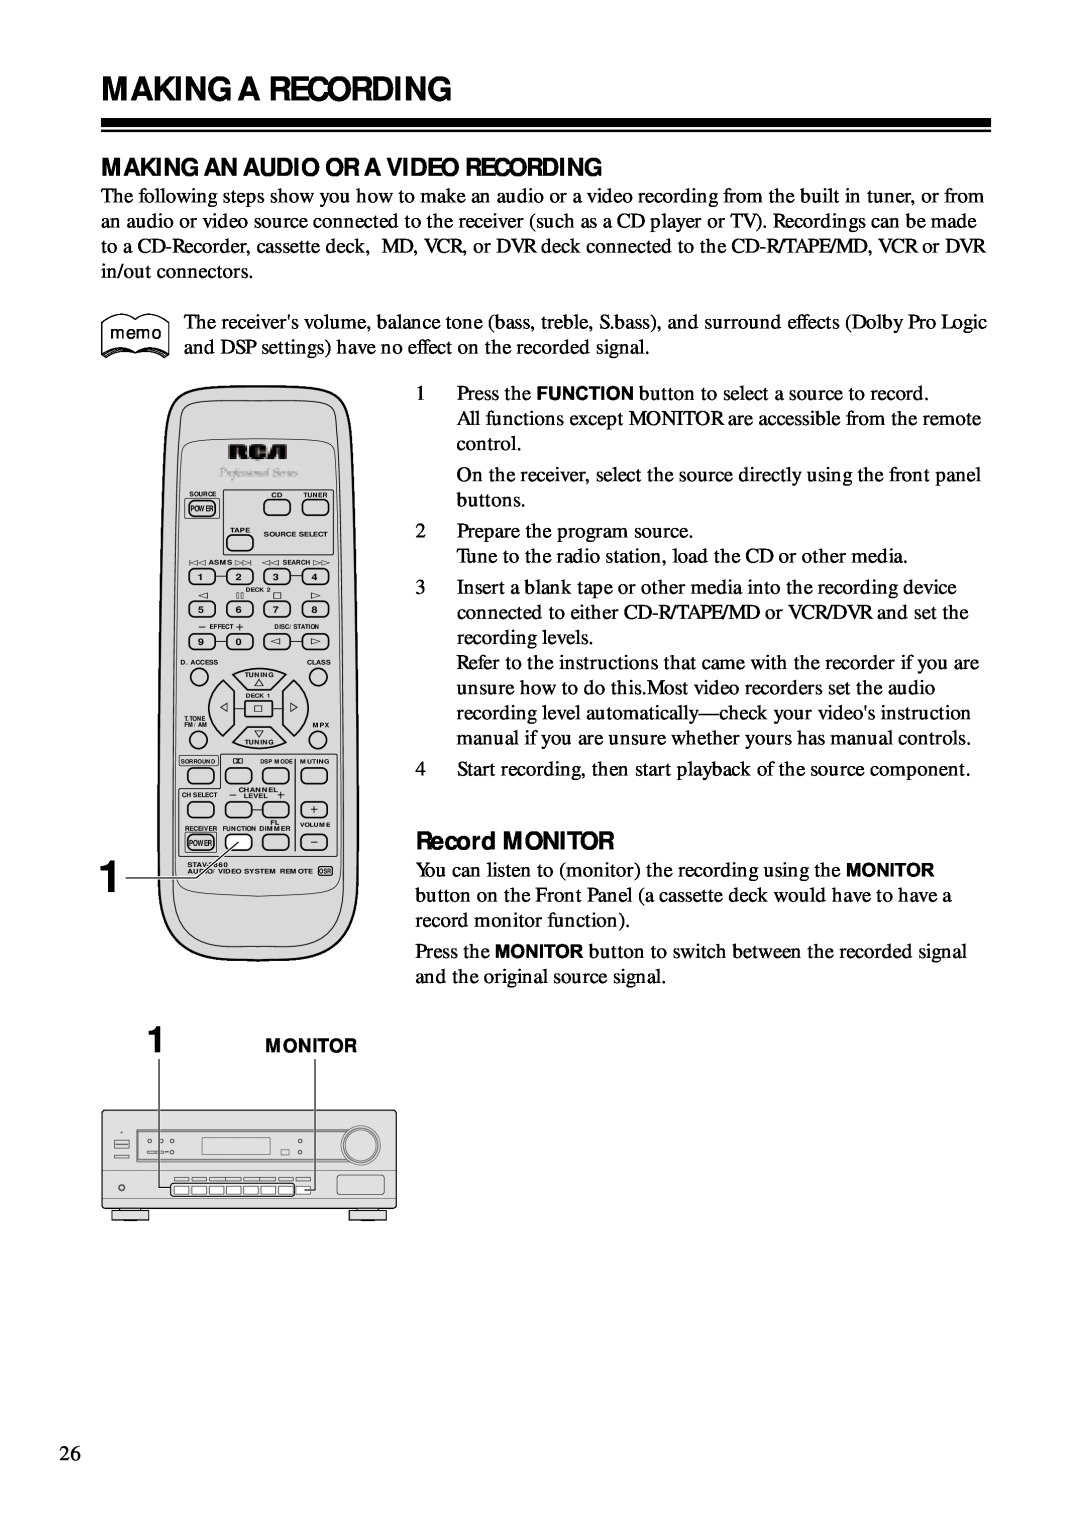 RCA STAV3860 owner manual Making A Recording, Making An Audio Or A Video Recording, Record MONITOR 